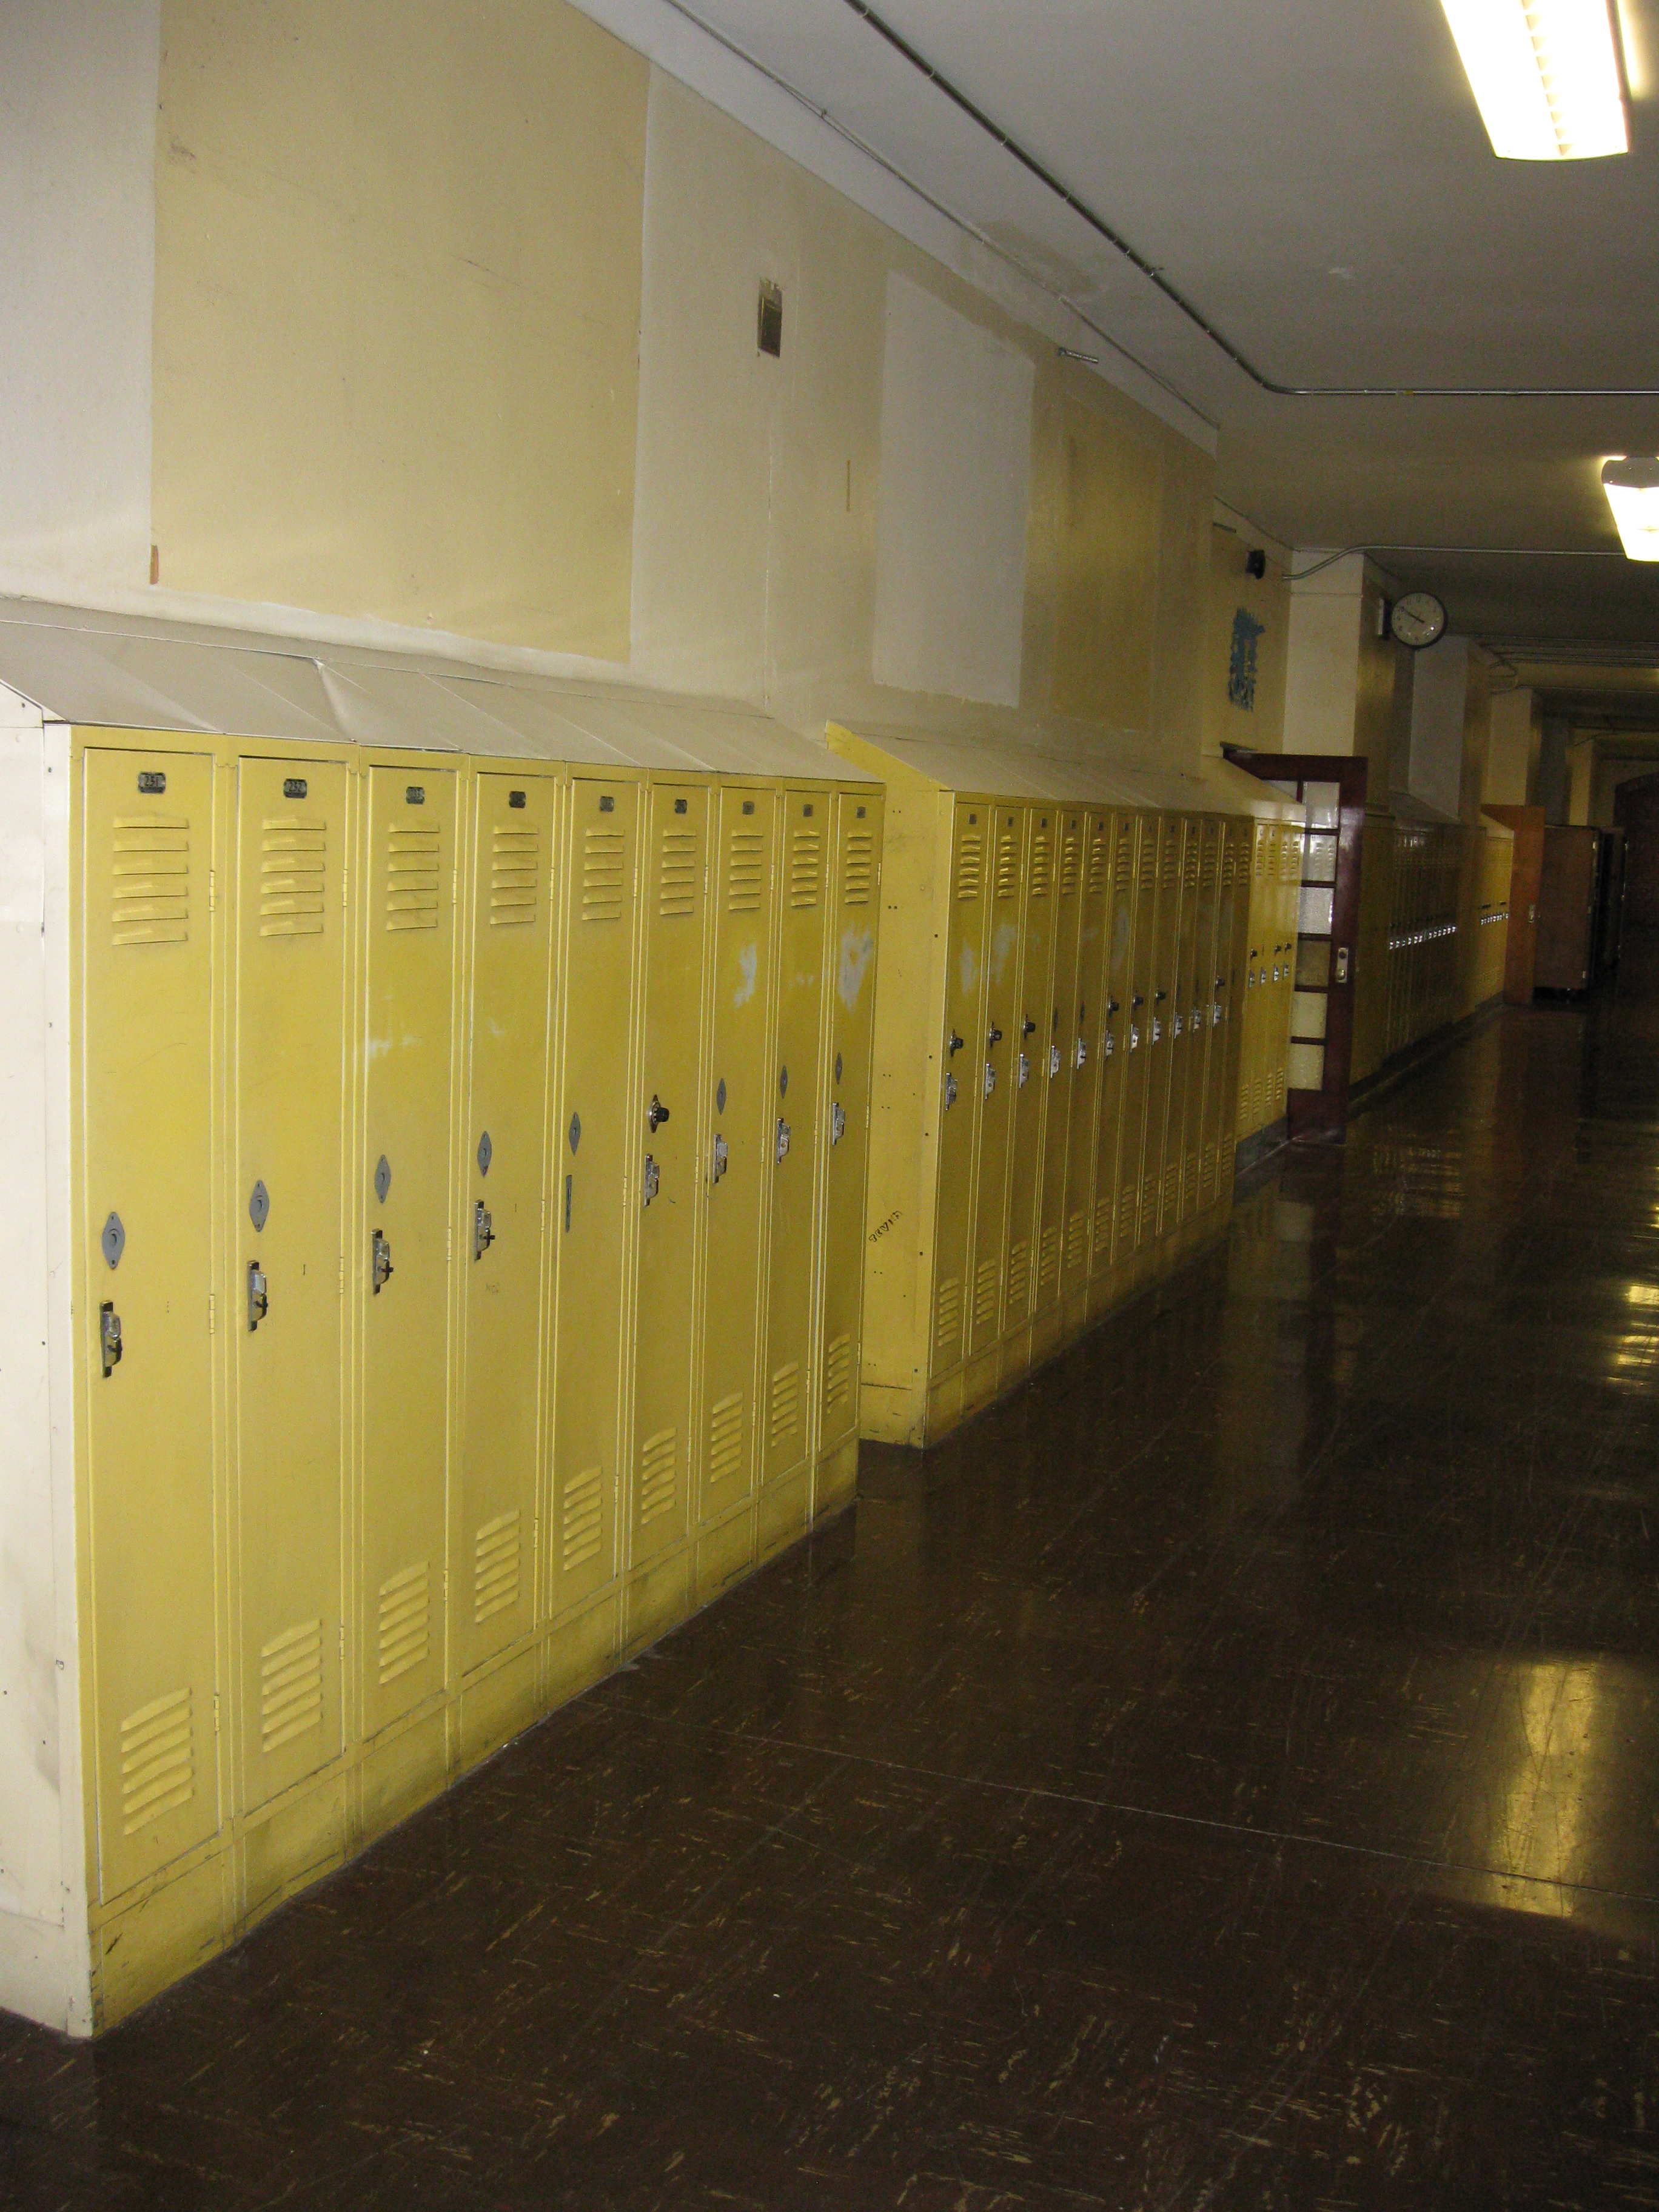 Hallways looked empty without all the class photos...but you could remember the thousands who walked these halls and almost hear their voices.